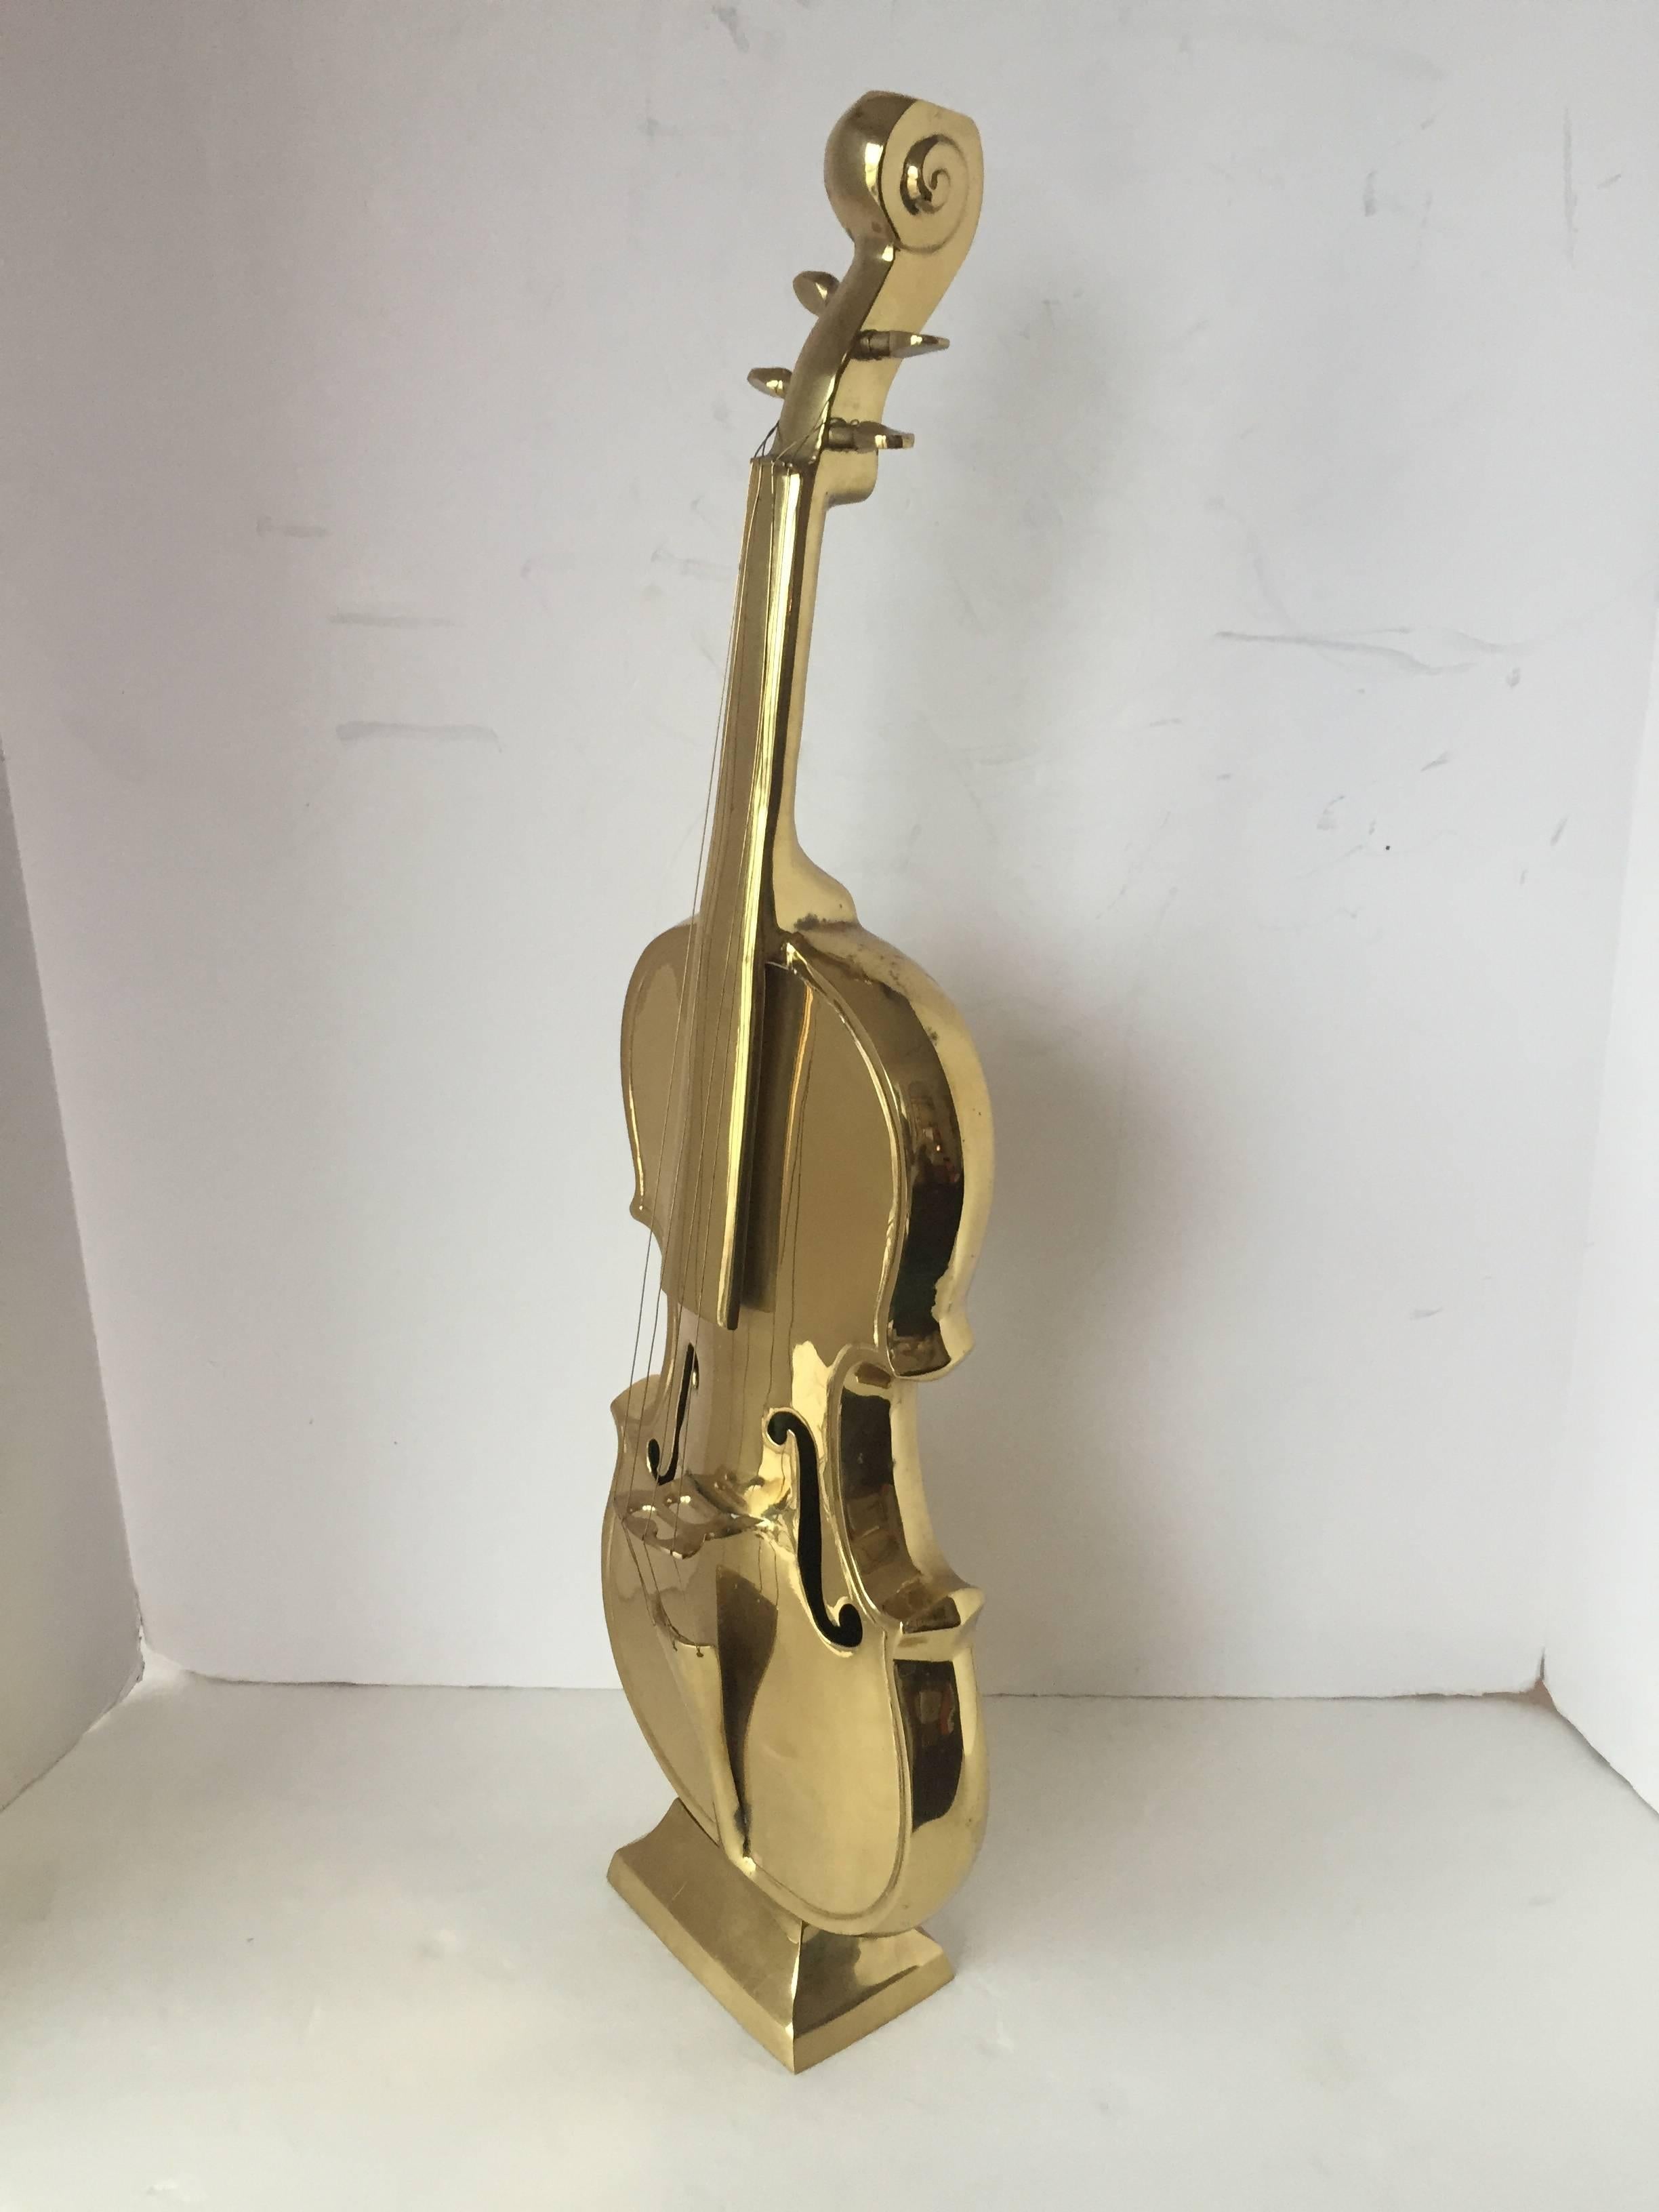 Extremely well-made, lifesize violin in brass with workable tuners and strings. Unsigned.